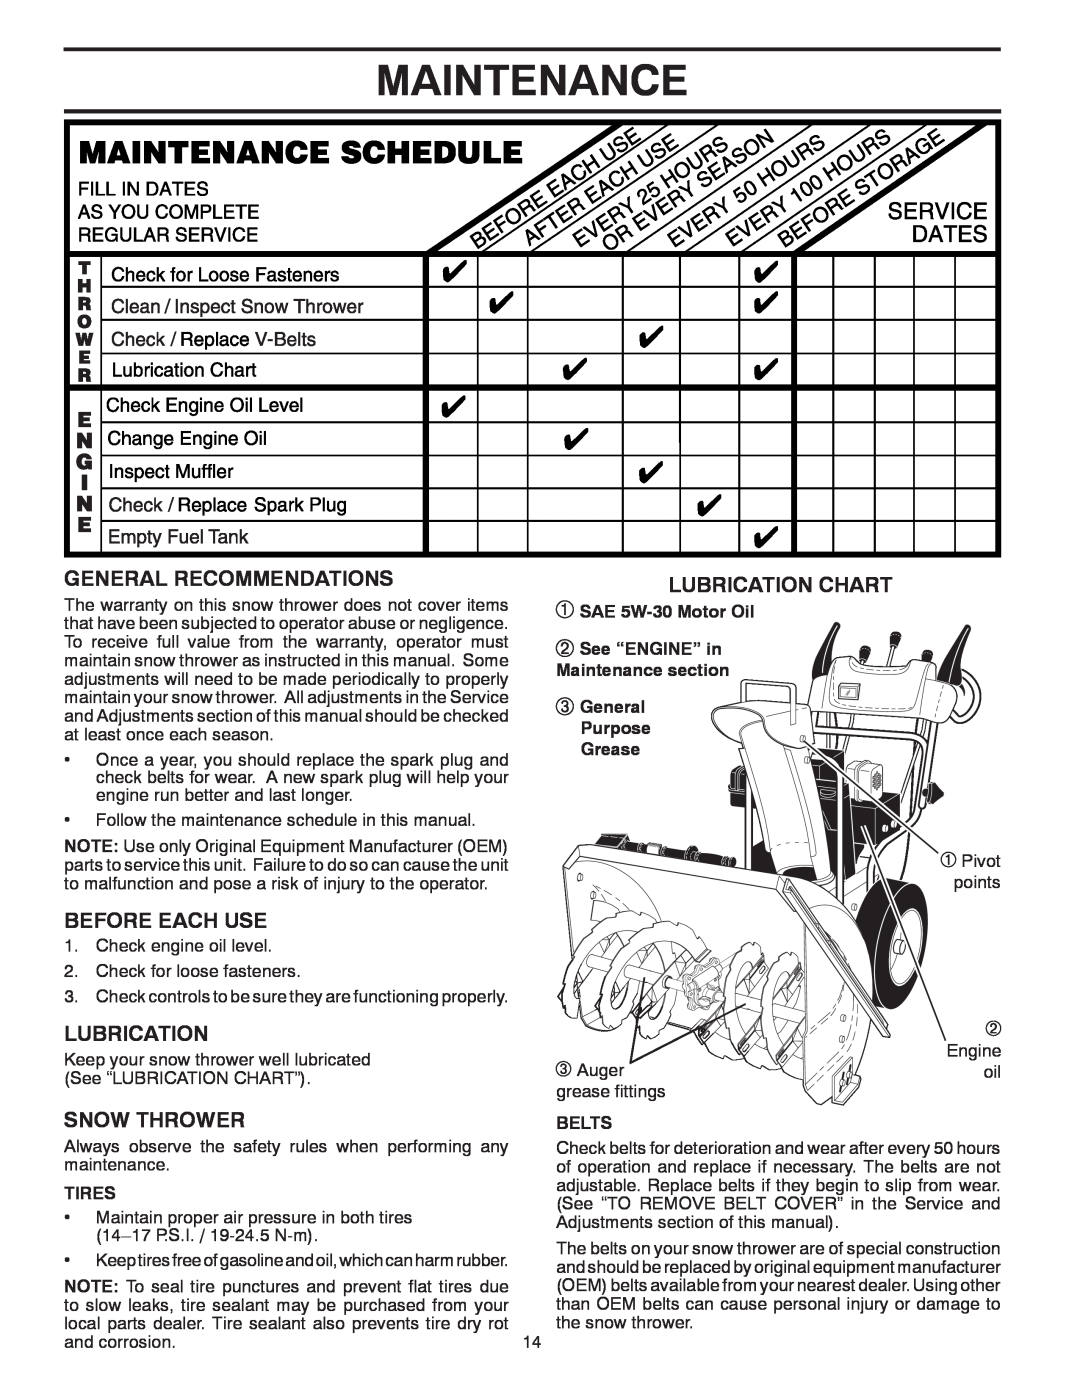 Poulan PP414EPS30 owner manual Maintenance, General Recommendations, Before Each Use, Lubrication Chart, Snow Thrower 